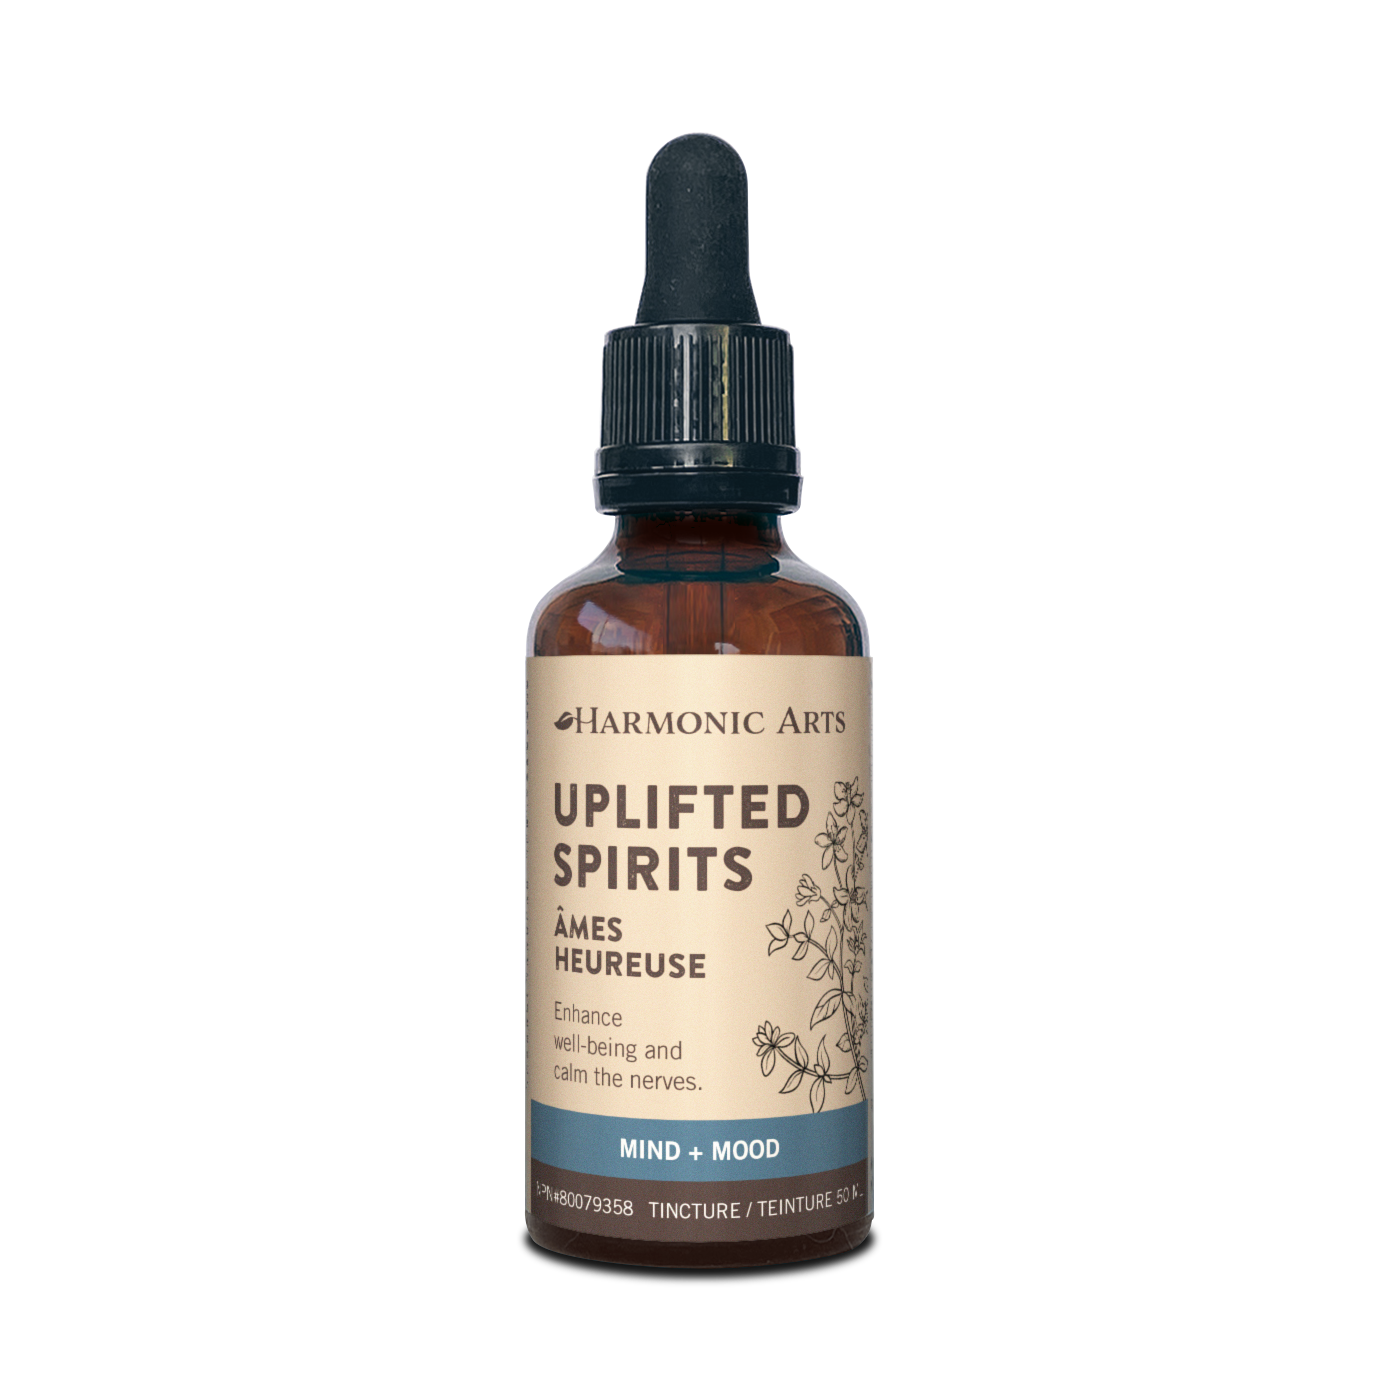 Uplifted-Spirits-50mL-Render.png__PID:0f500a75-fa62-4070-b3ce-51a7e0f76d17